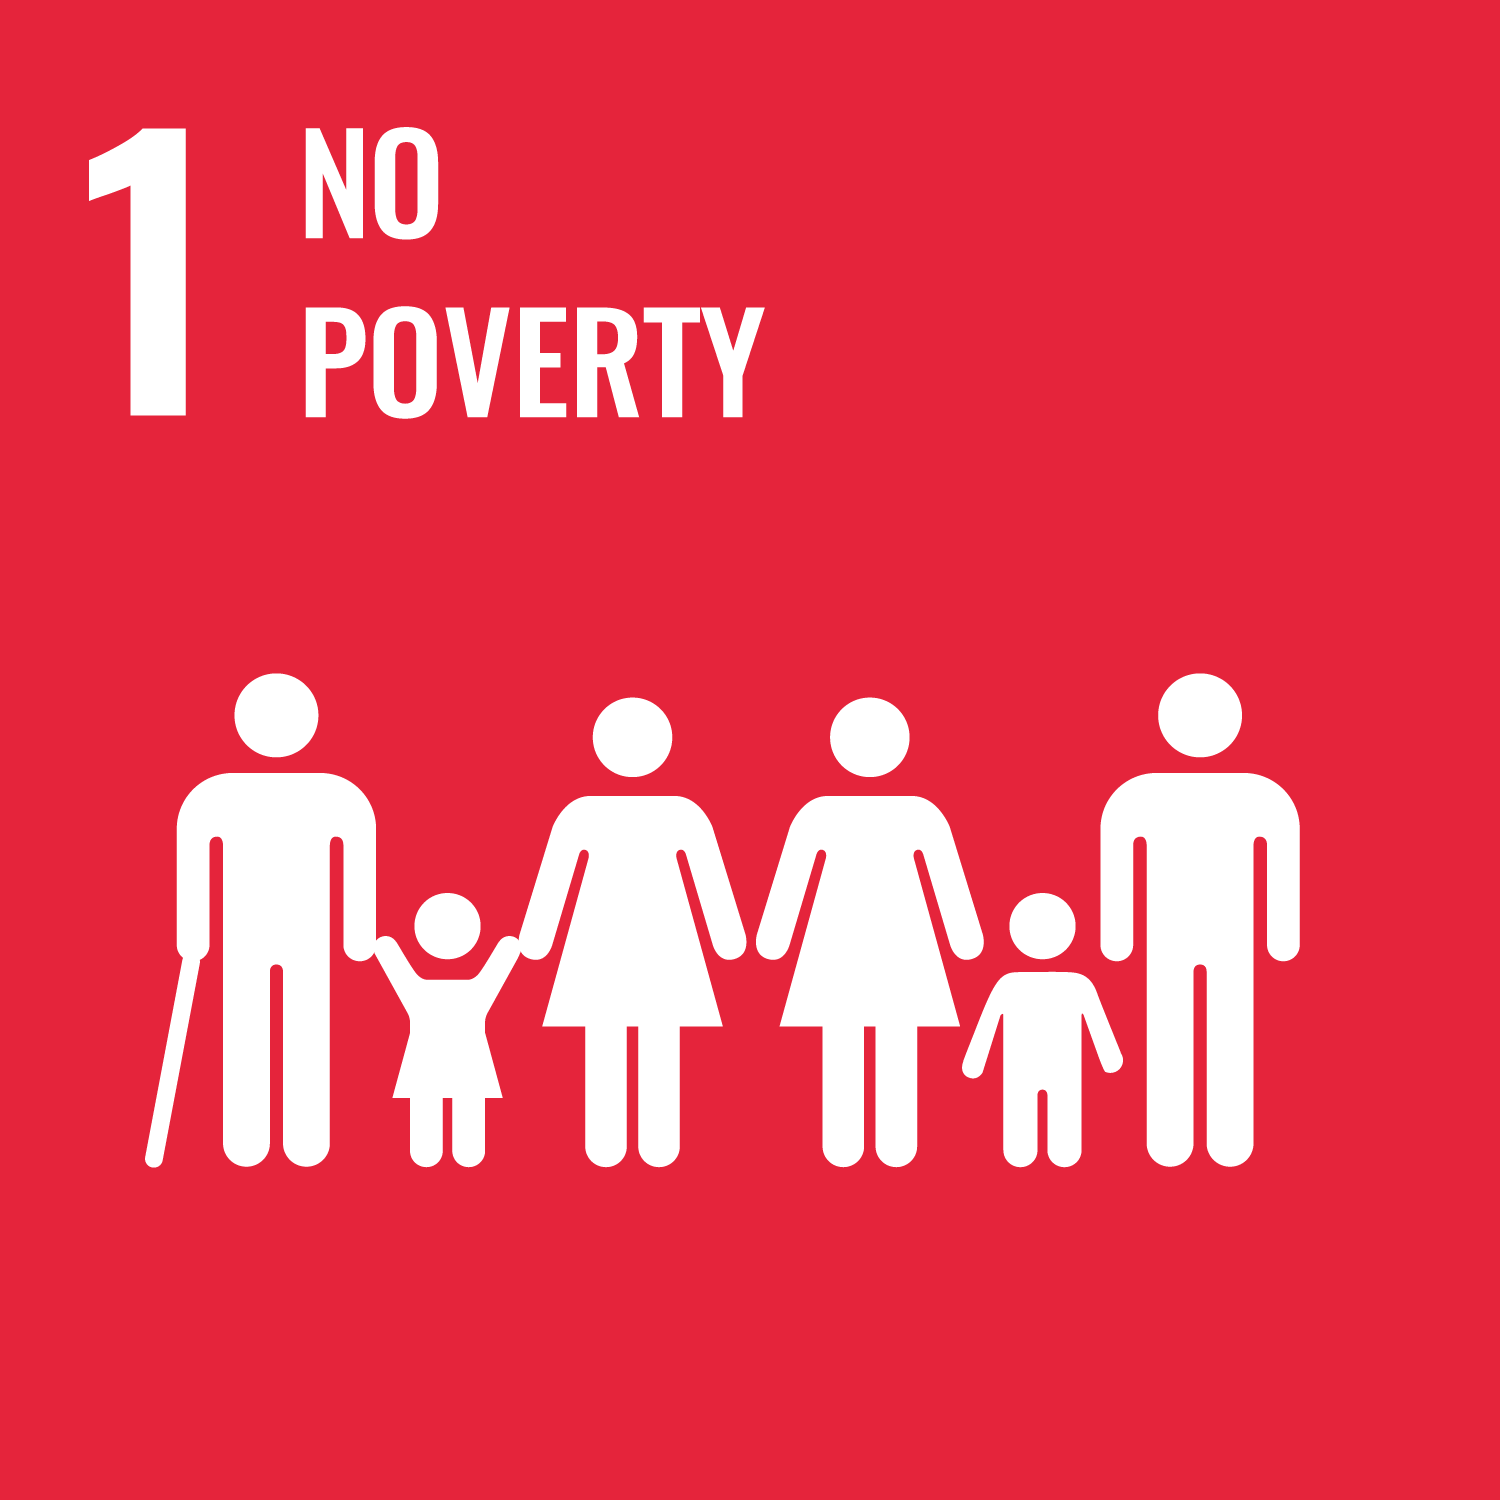 Graphic for SDG1 No Poverty